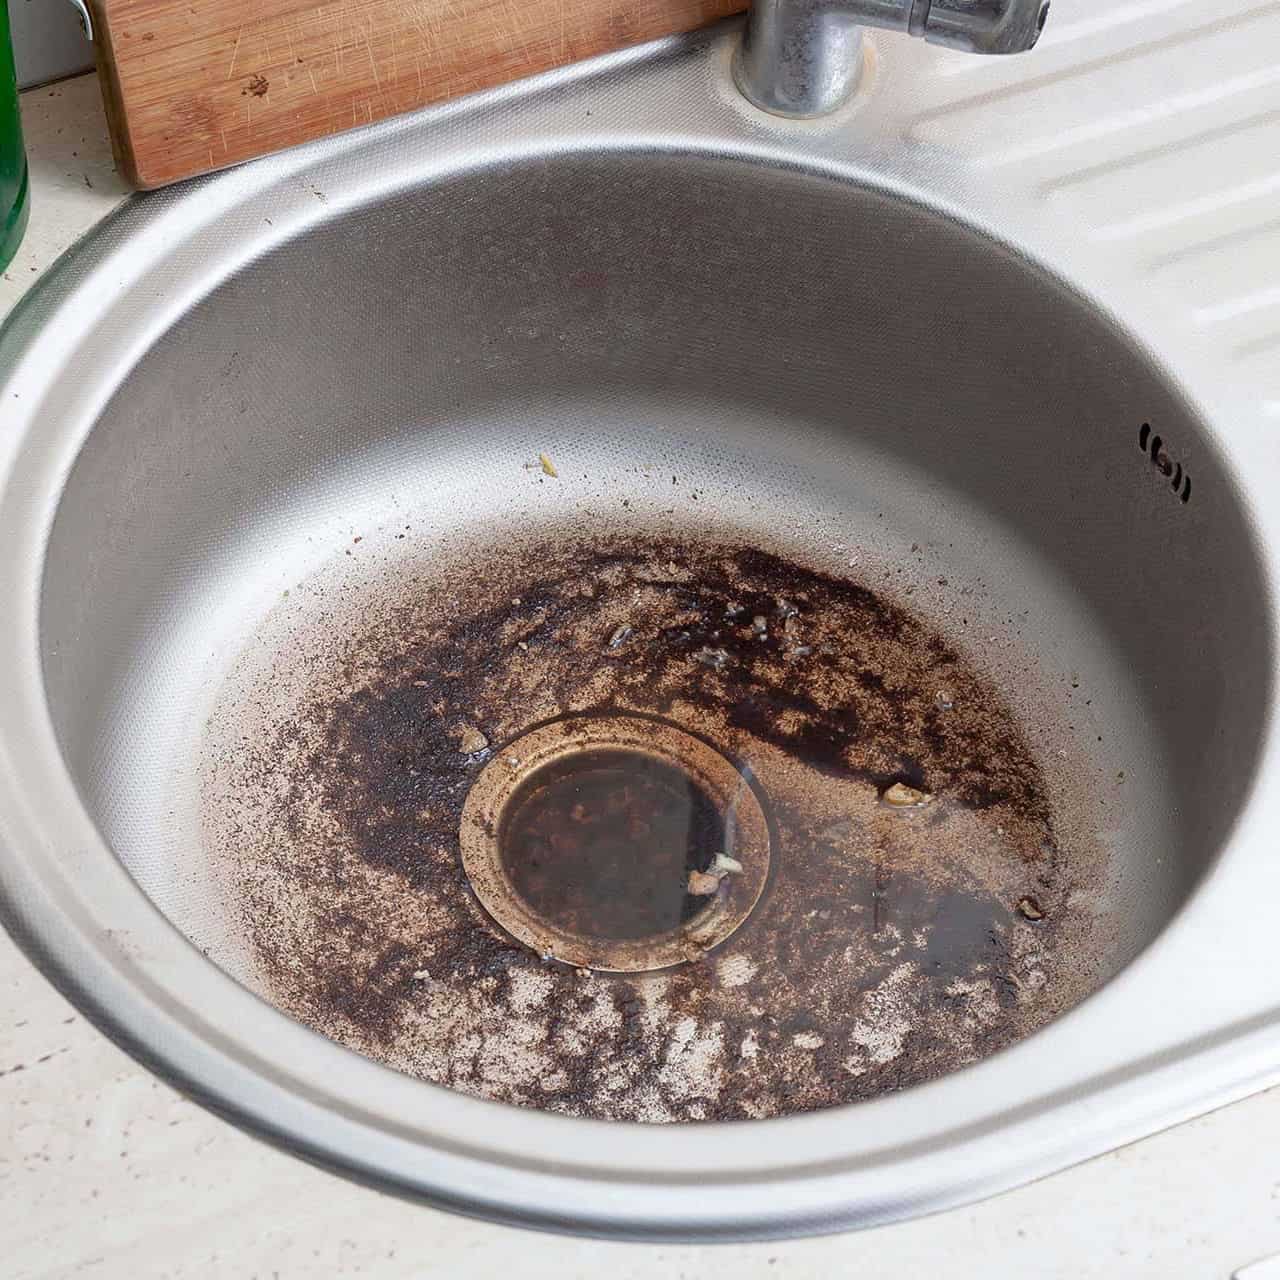 Why Is My Sink Clogged?